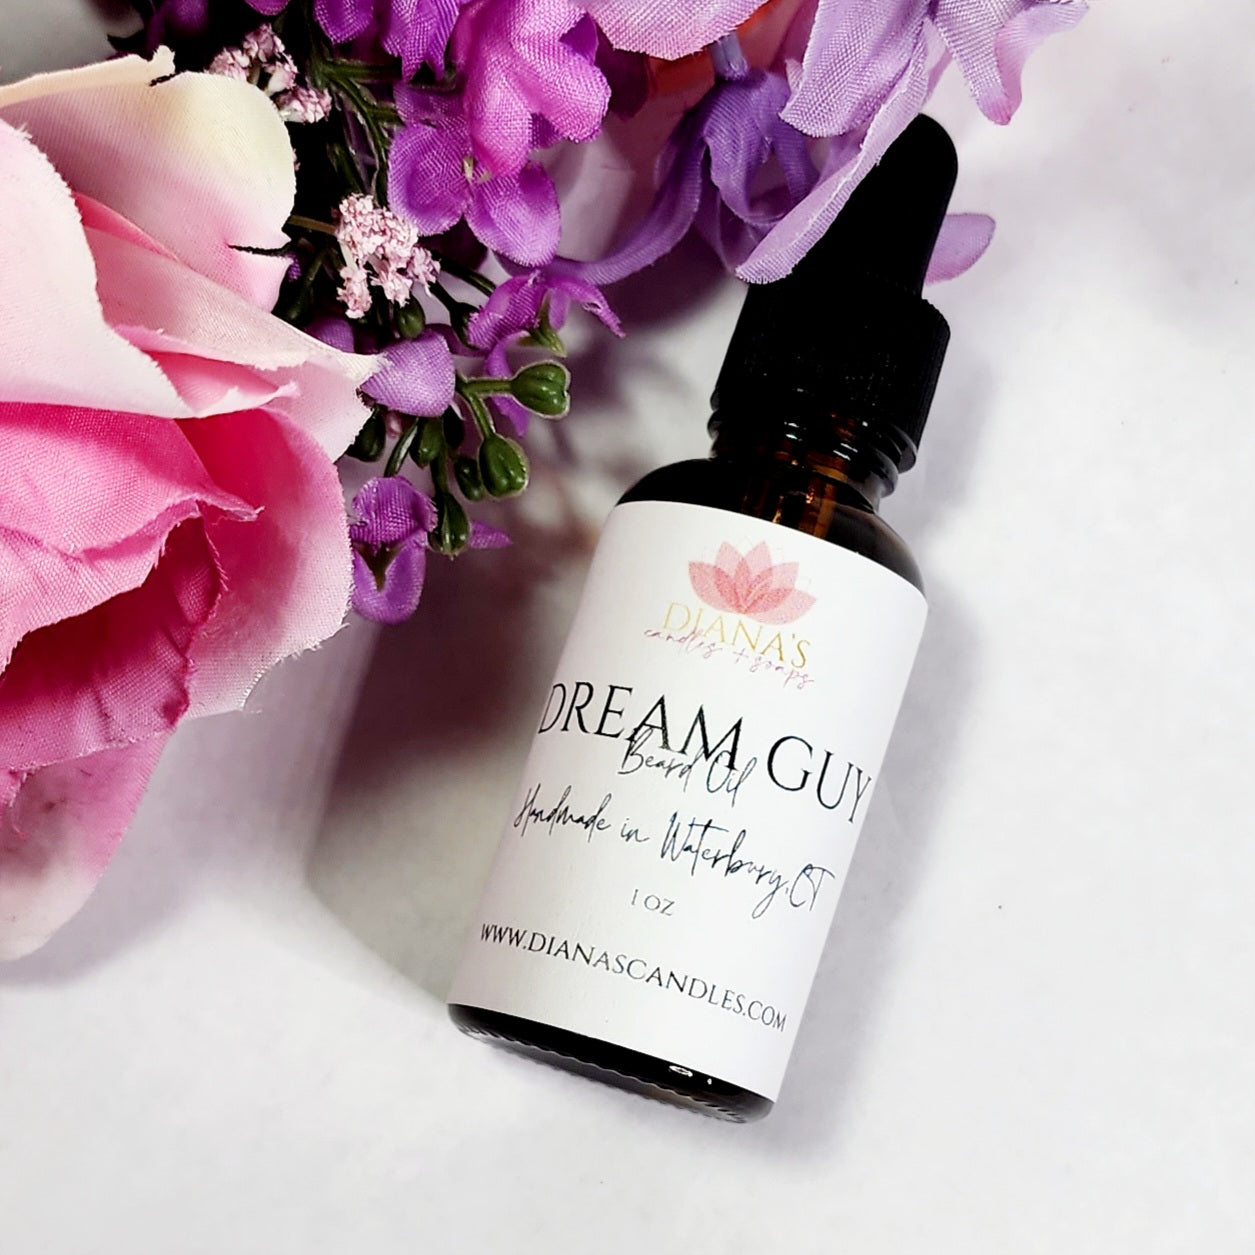 Dream Guy Beard Oil - Diana's Candles and Soaps 